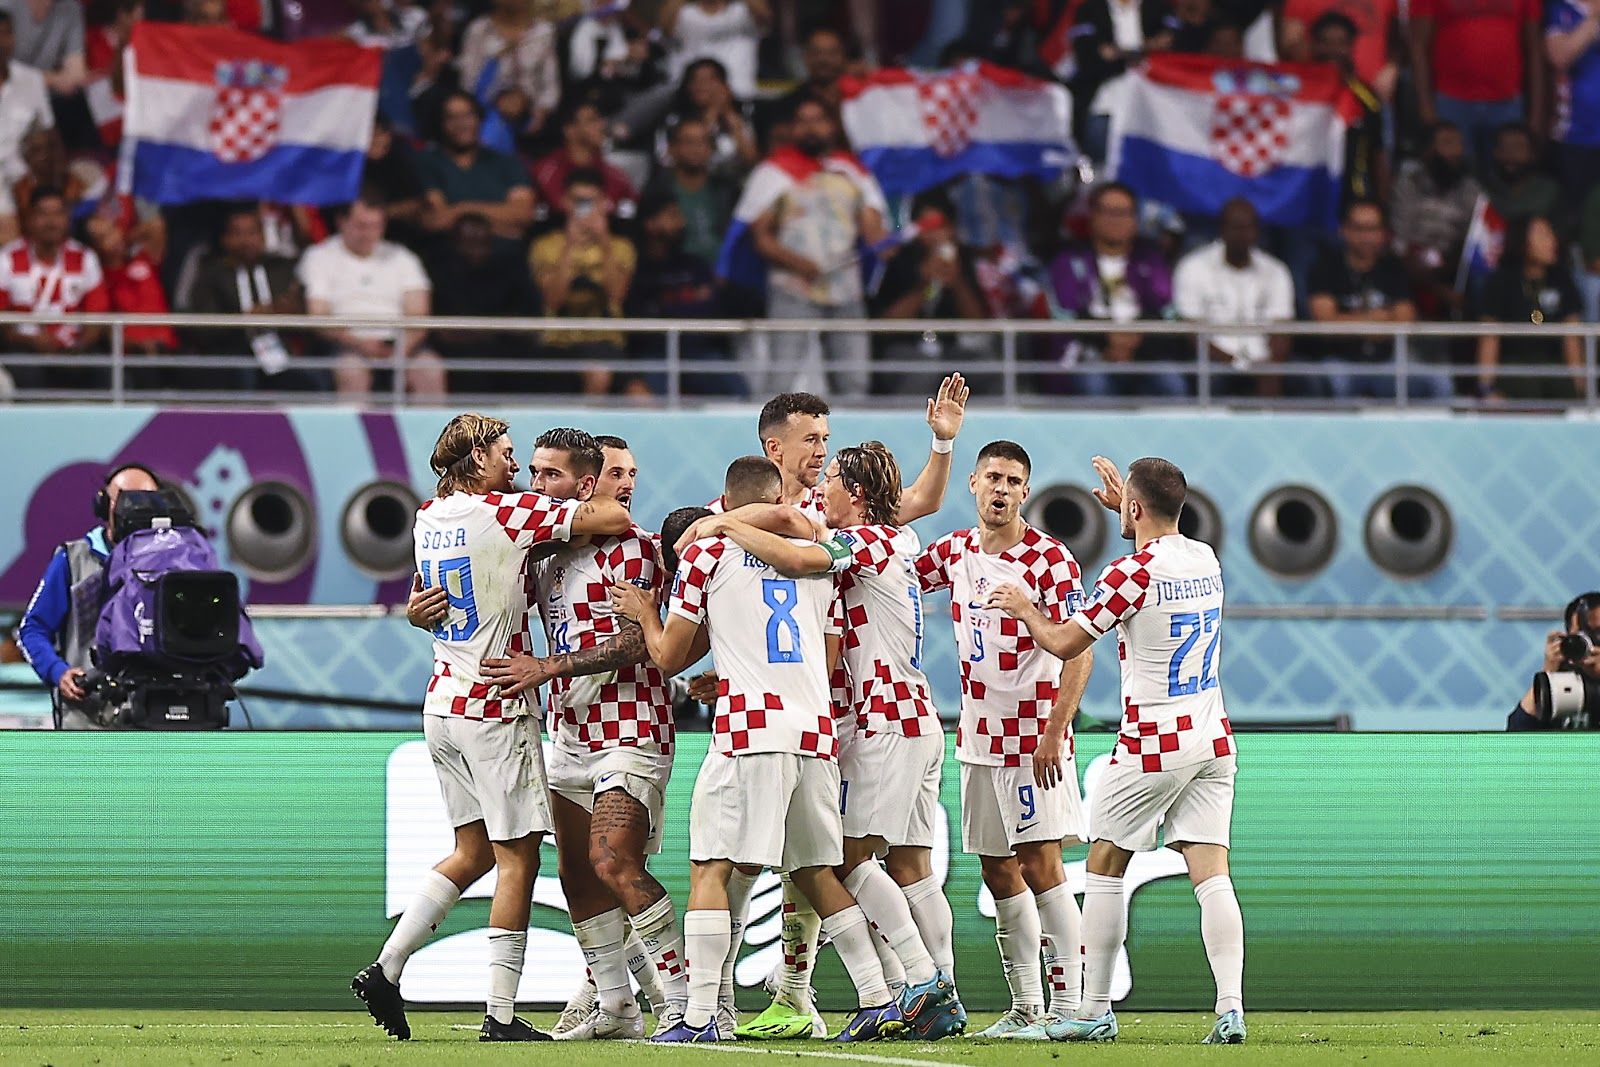 Croatia National Team Players celebrating at the World Cup 2022.